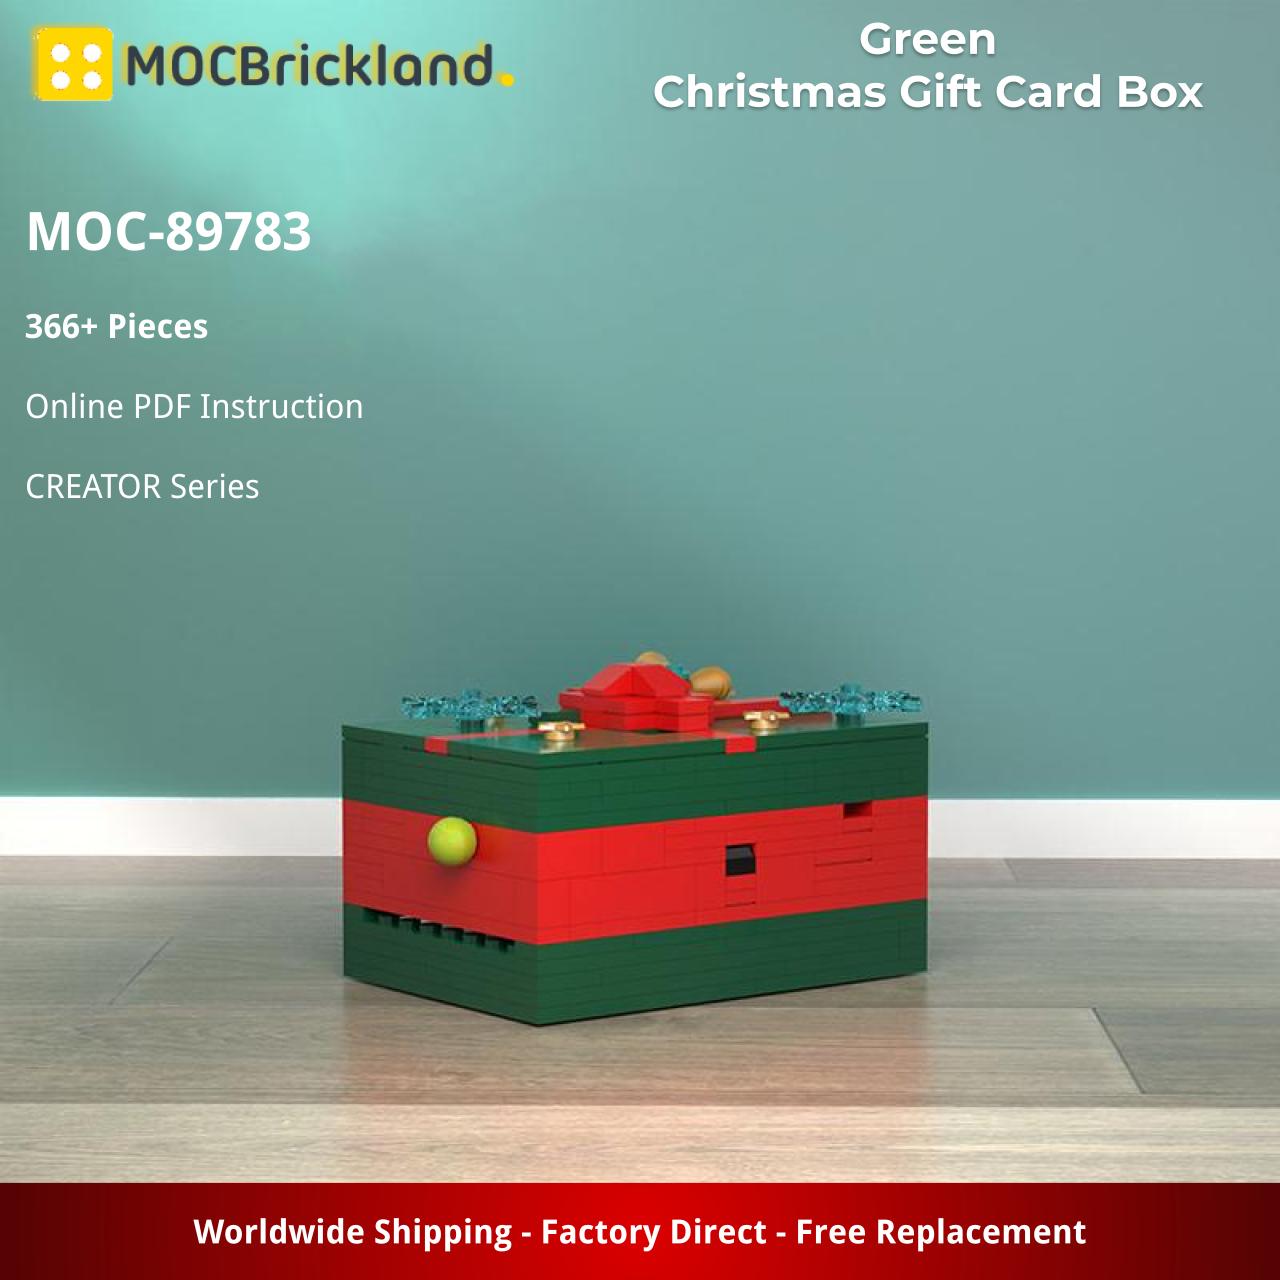 Green Christmas Gift Card Box CREATOR MOC-89783 with 366 pieces